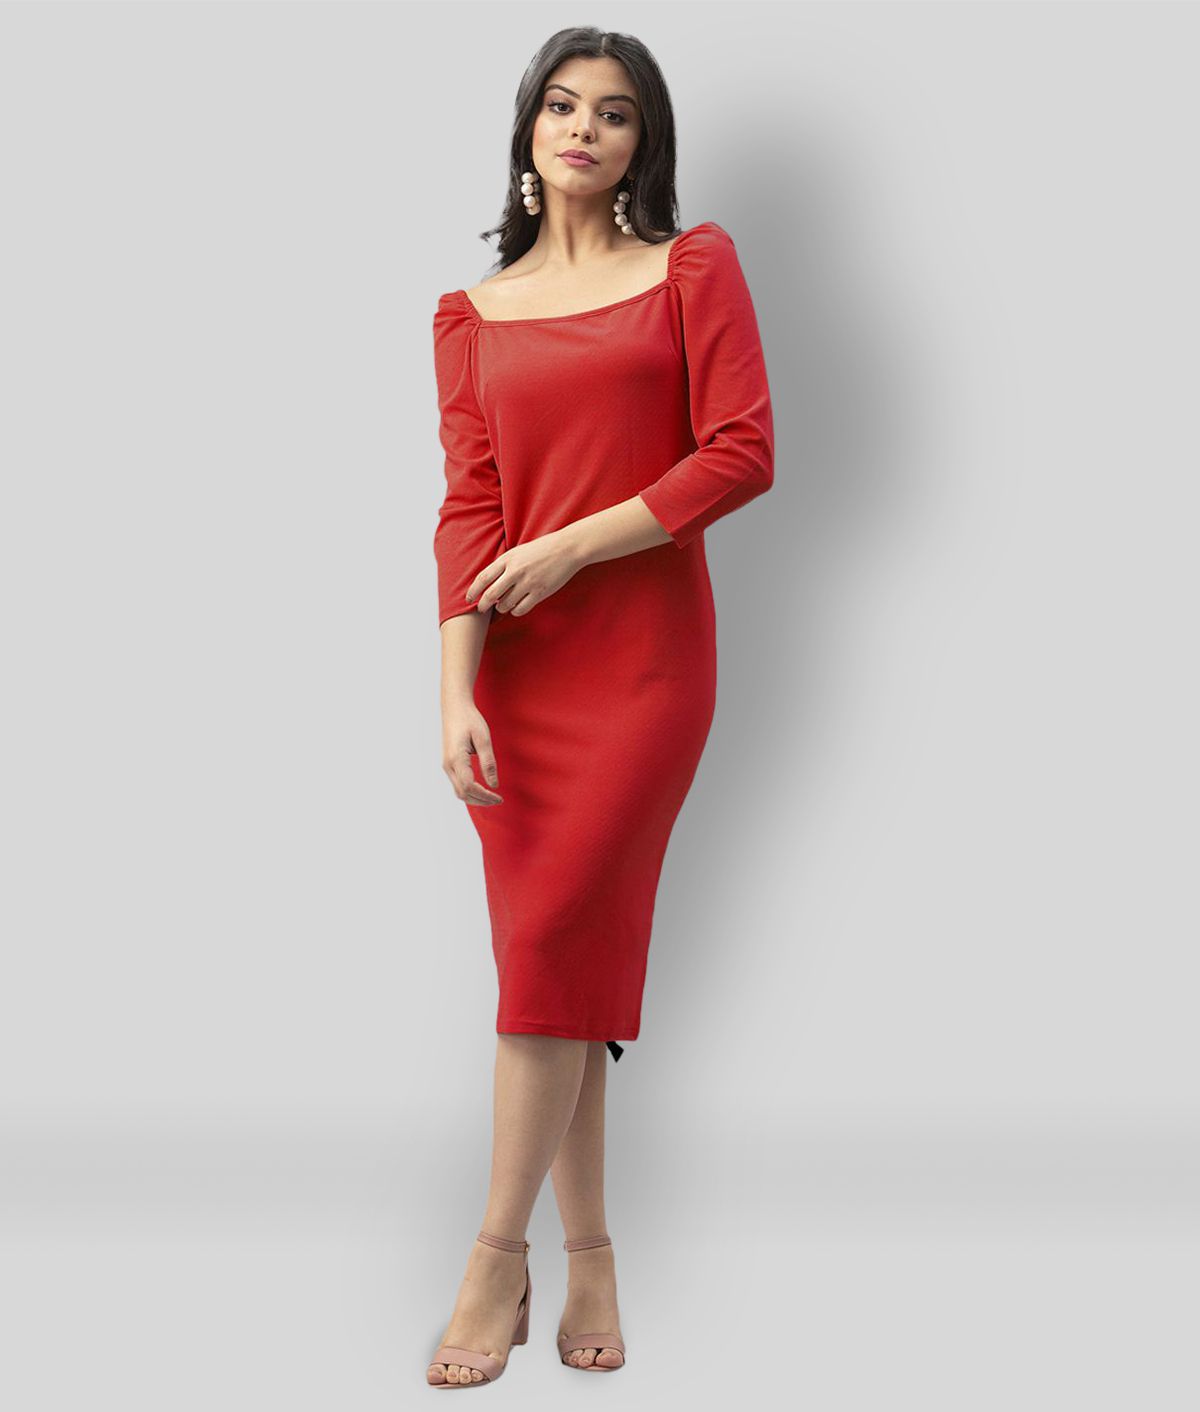     			Selvia - Red Cotton Blend Women's Bodycon Dress ( Pack of 1 )